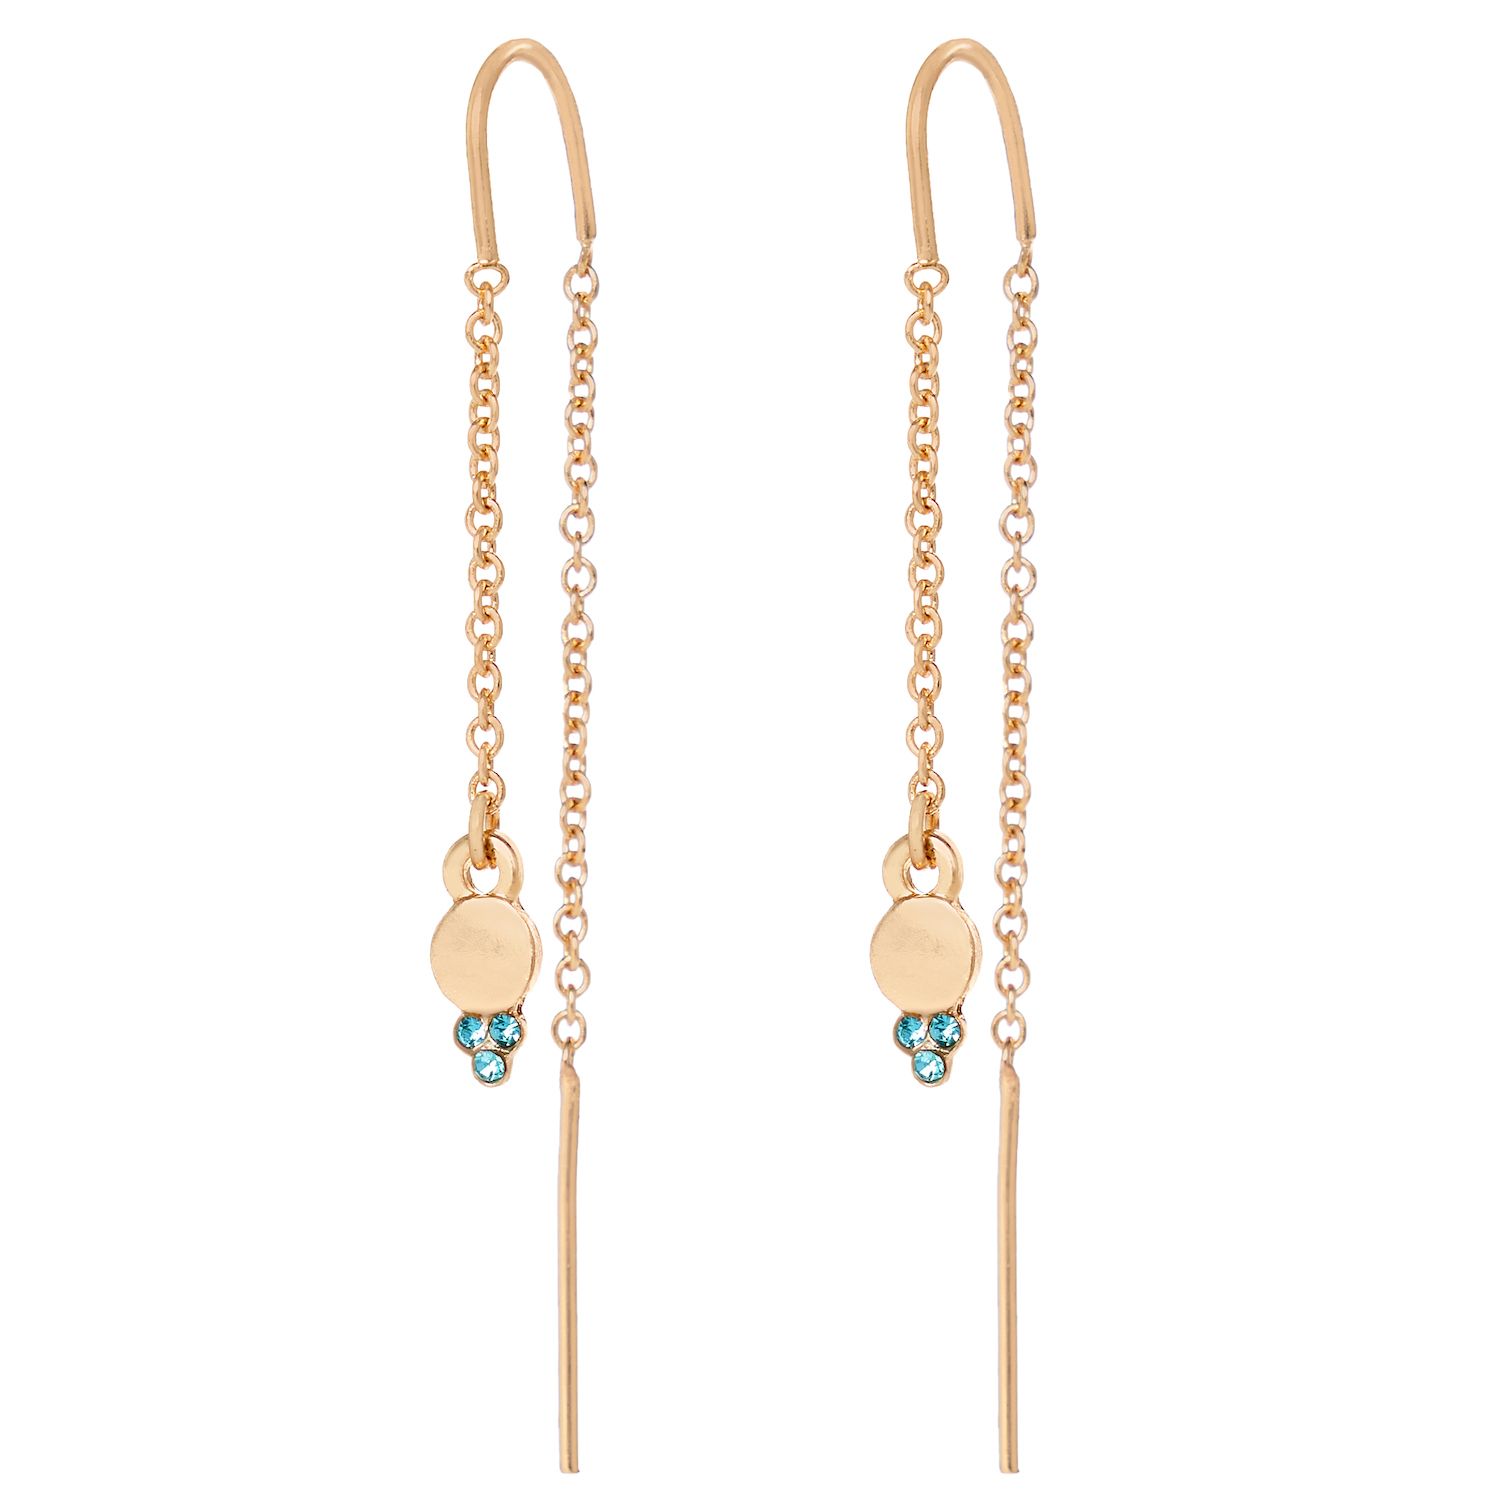 Image for LC Lauren Conrad Blue Simulated Crystal Drop Threader Earrings at Kohl's.